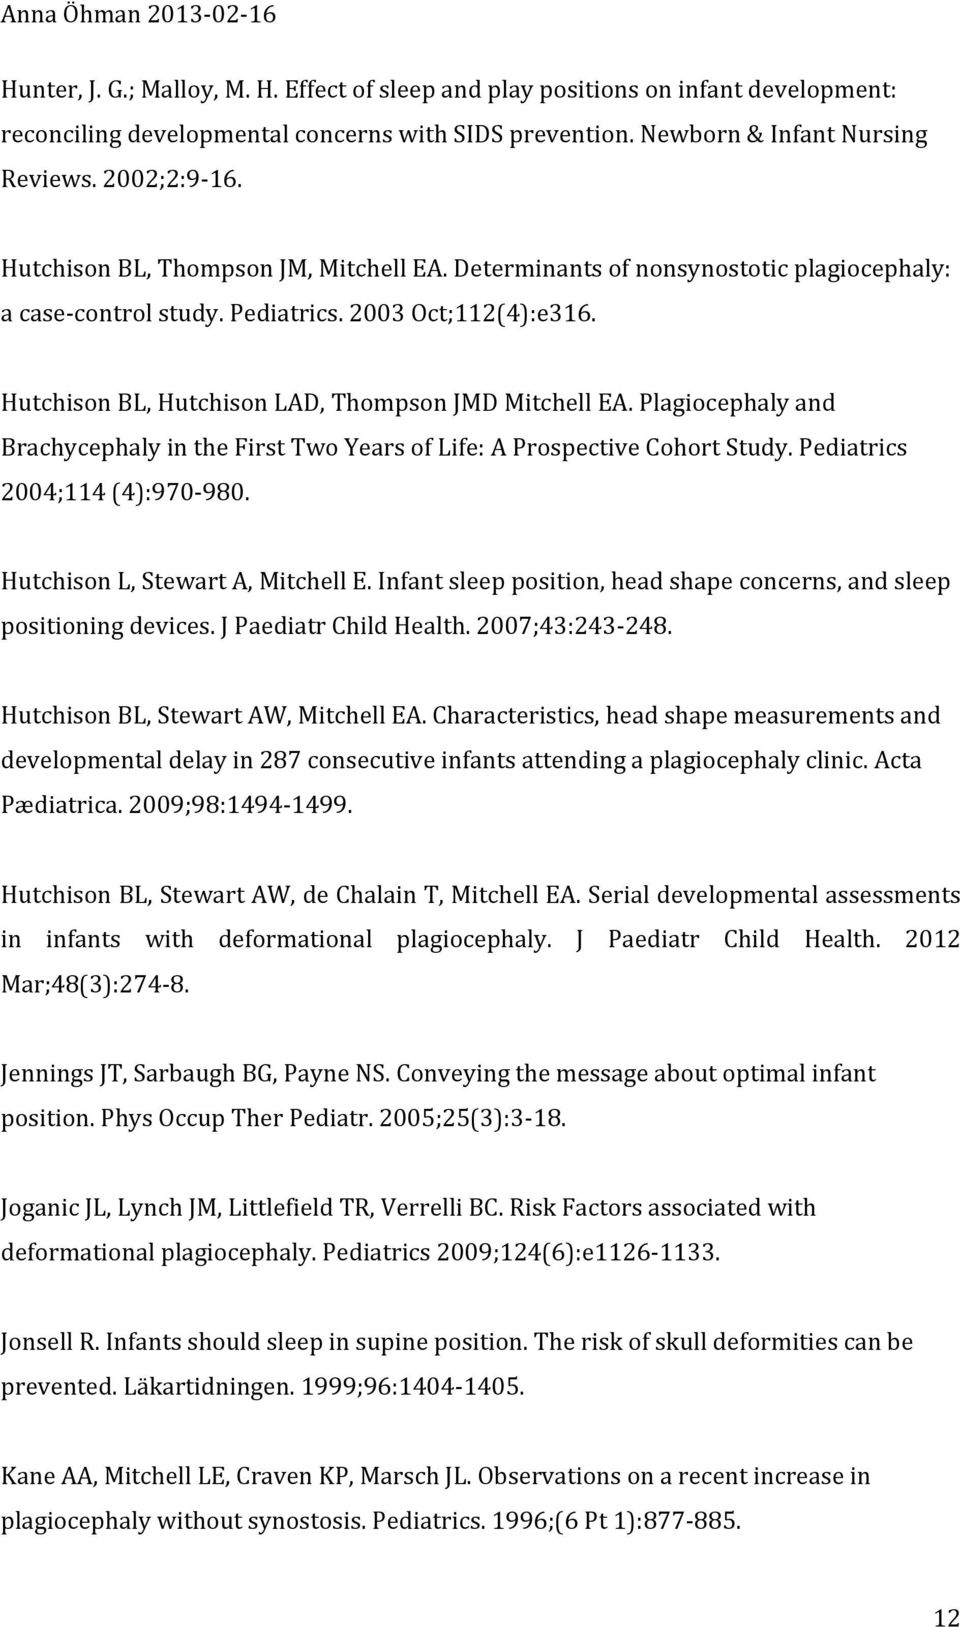 Plagiocephaly and Brachycephaly in the First Two Years of Life: A Prospective Cohort Study. Pediatrics 2004;114 (4):970-980. Hutchison L, Stewart A, Mitchell E.